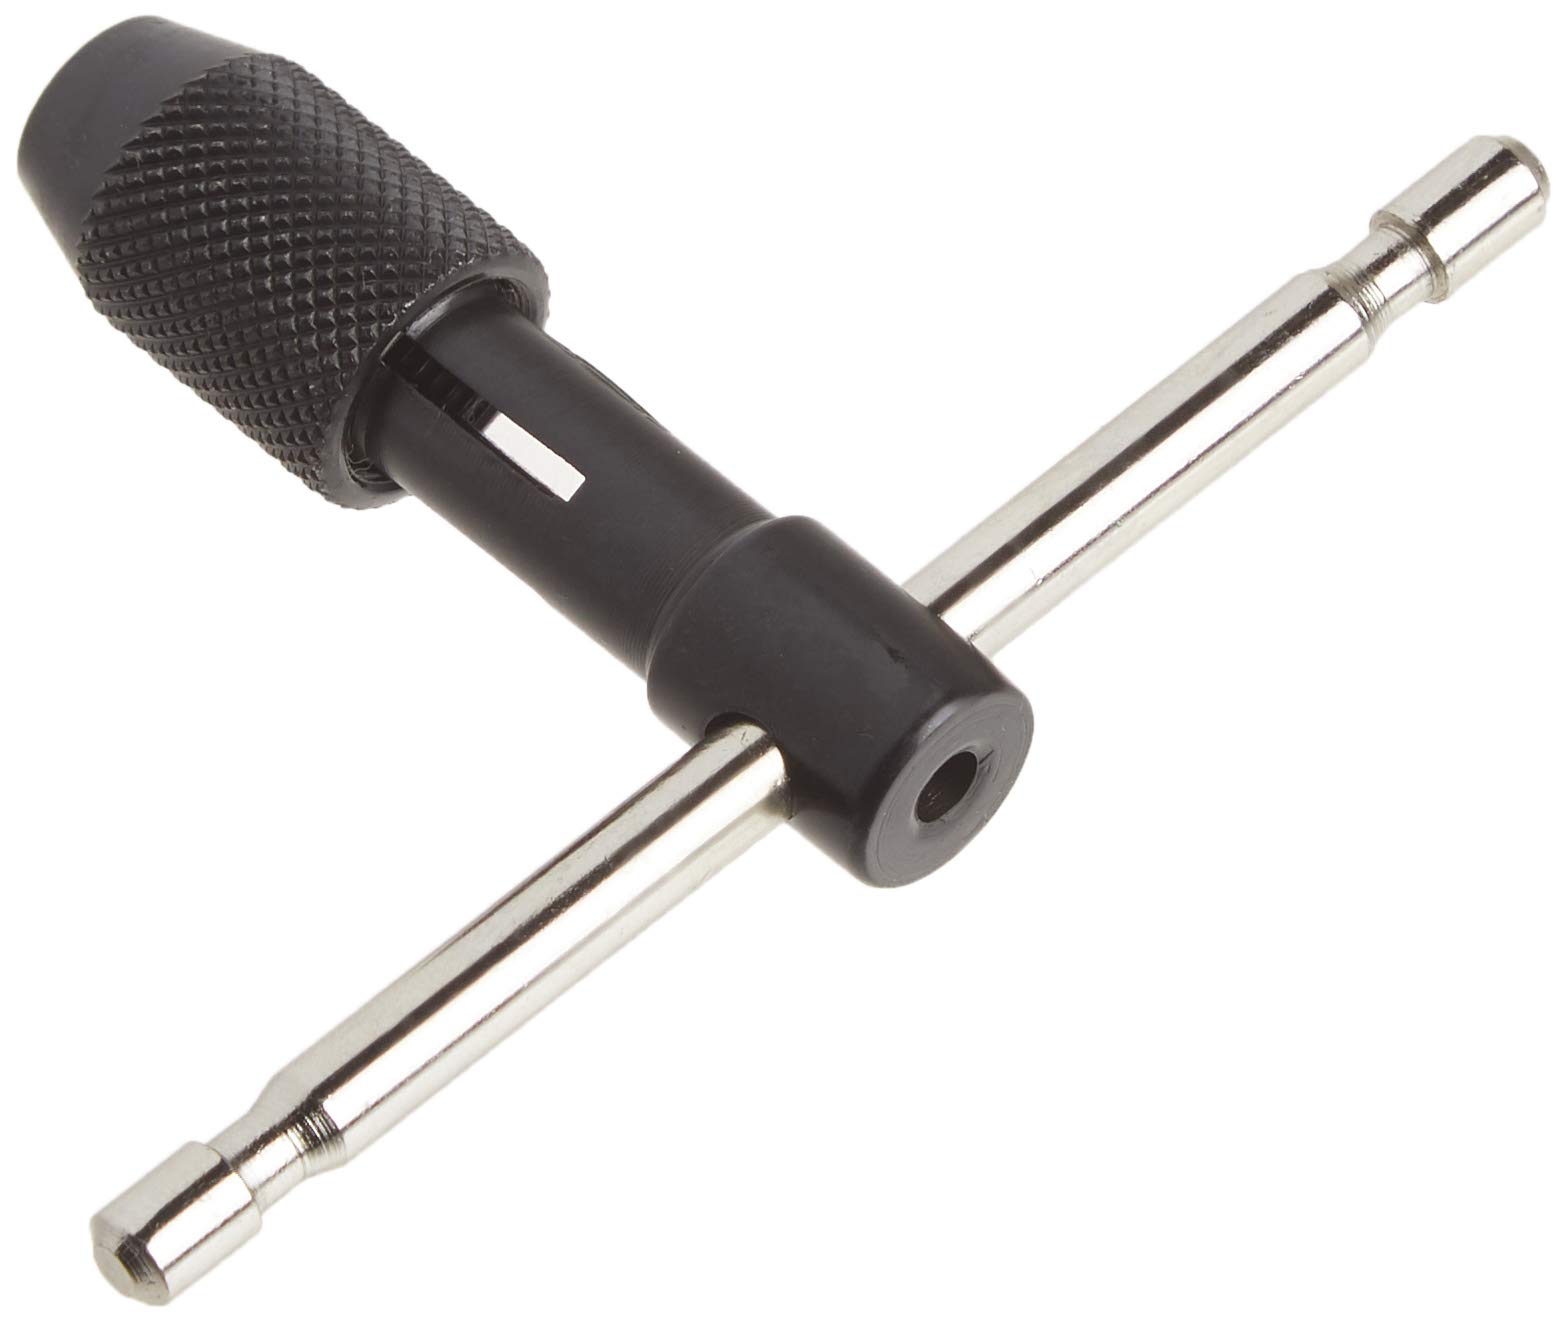 IRWIN Tools T-Handle 1/4-Inch Capacity Tap Wrench (12001)